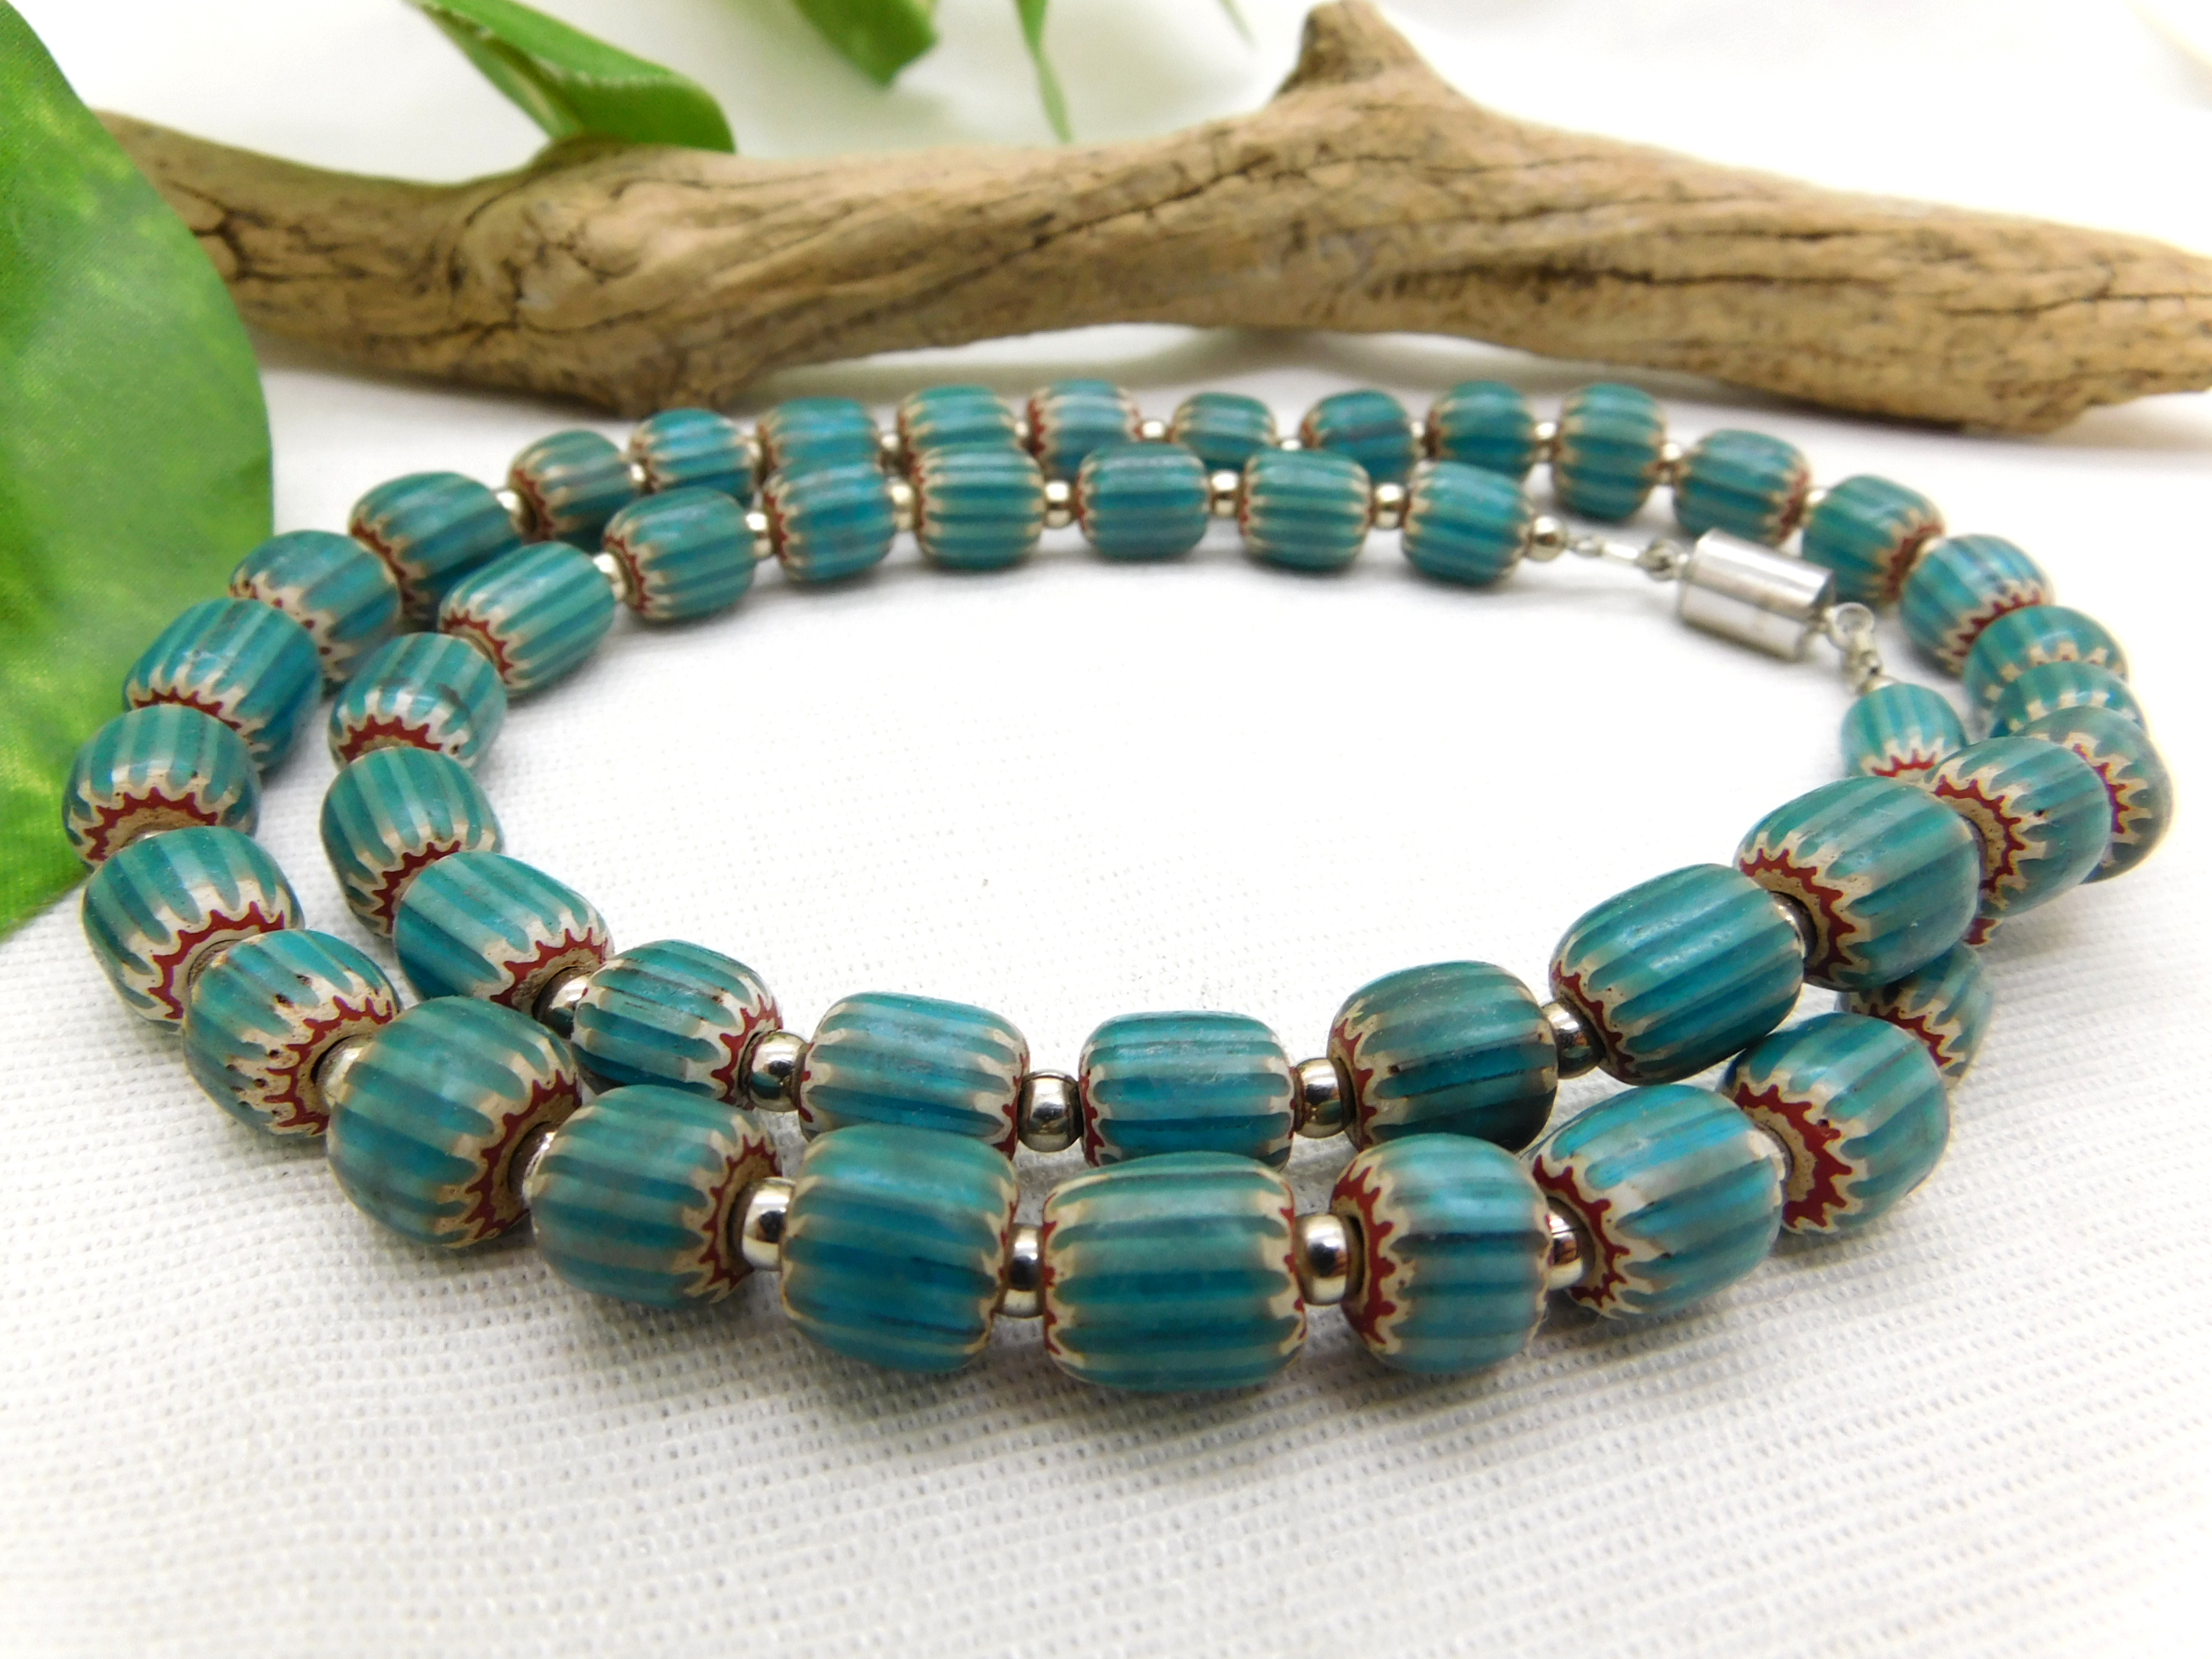 Necklace with turquoise chevron glass beads - antique look